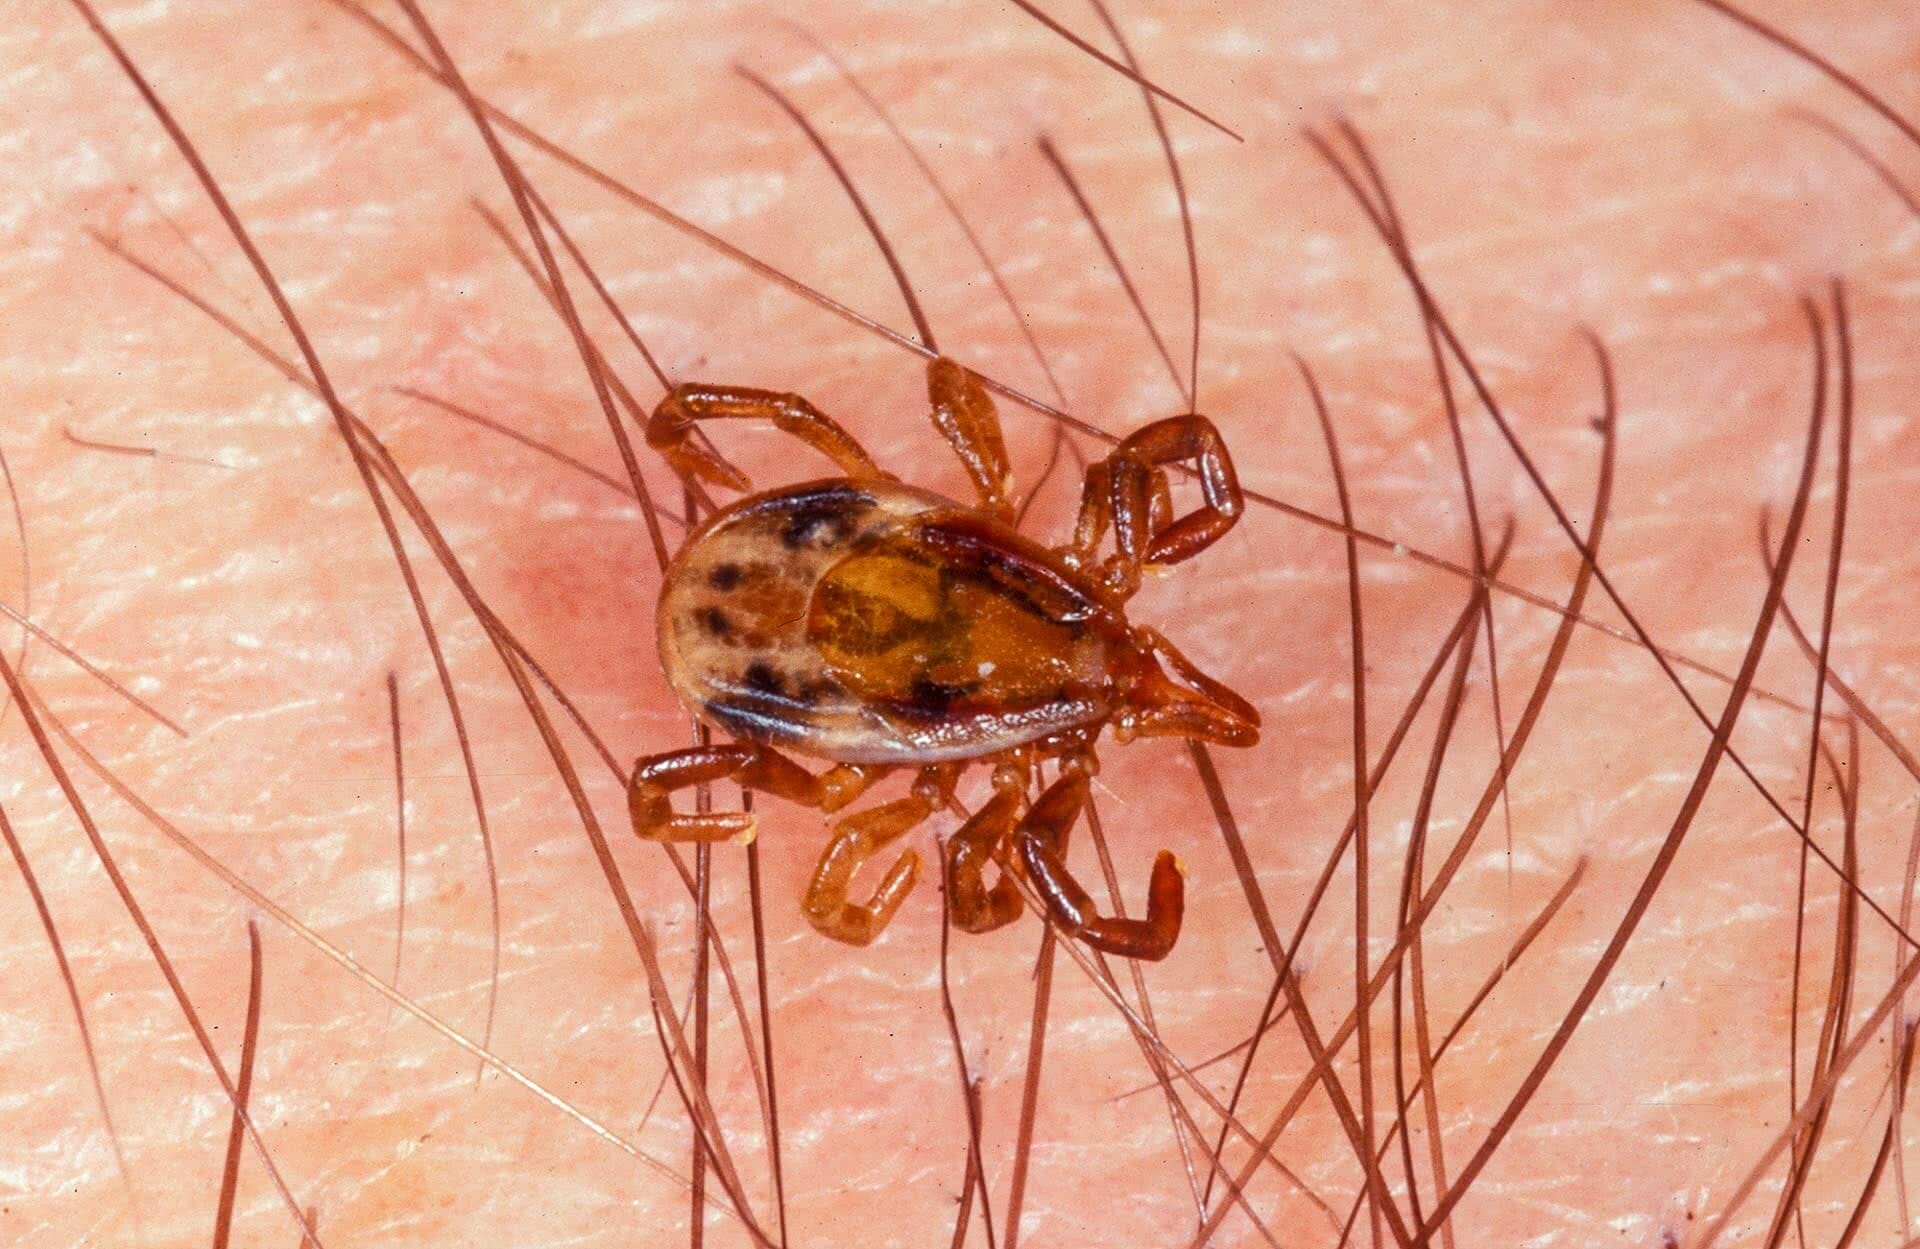 scrub tick, Australian Paralysis Tick, Ixodes holocyclus, unfed female, It’s Tick Season! How Deal With and Avoid the Nastiest of Critters, Roz Glazebrook